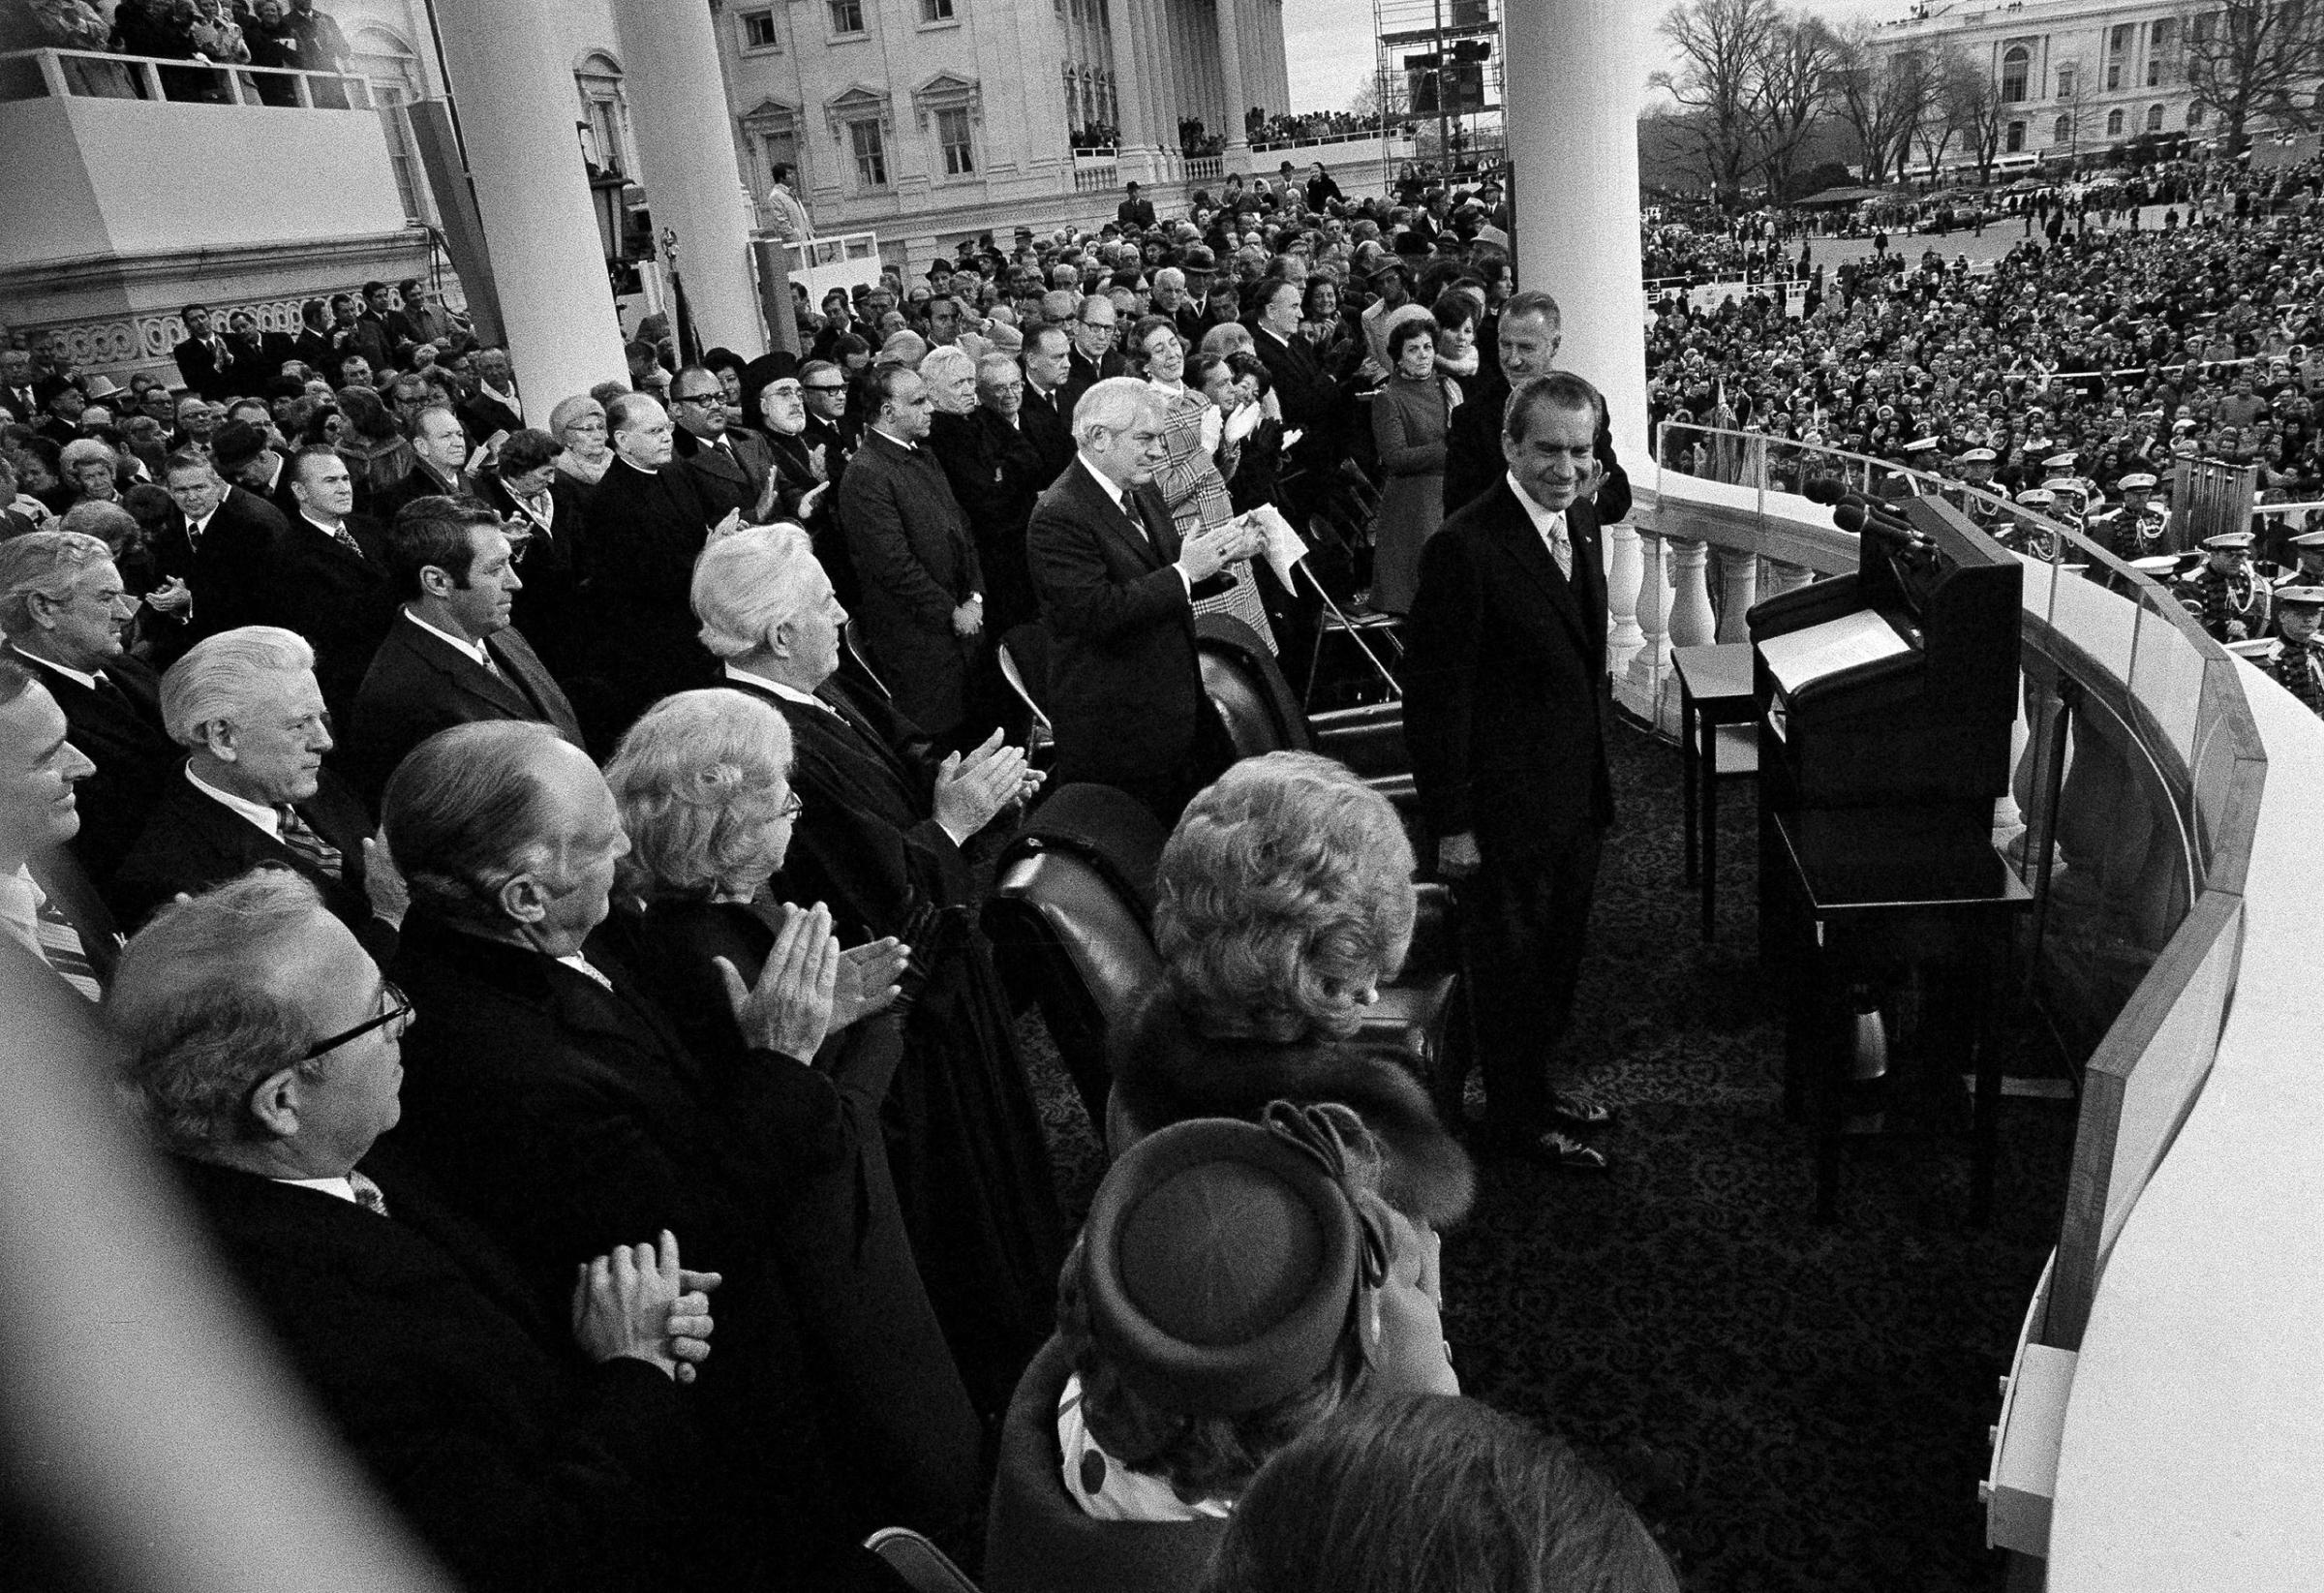 President Richard Nixon acknowledges the applause after delivering his inaugural address during his second inauguration at the Capitol in Washington, D.C., Jan. 20, 1973.